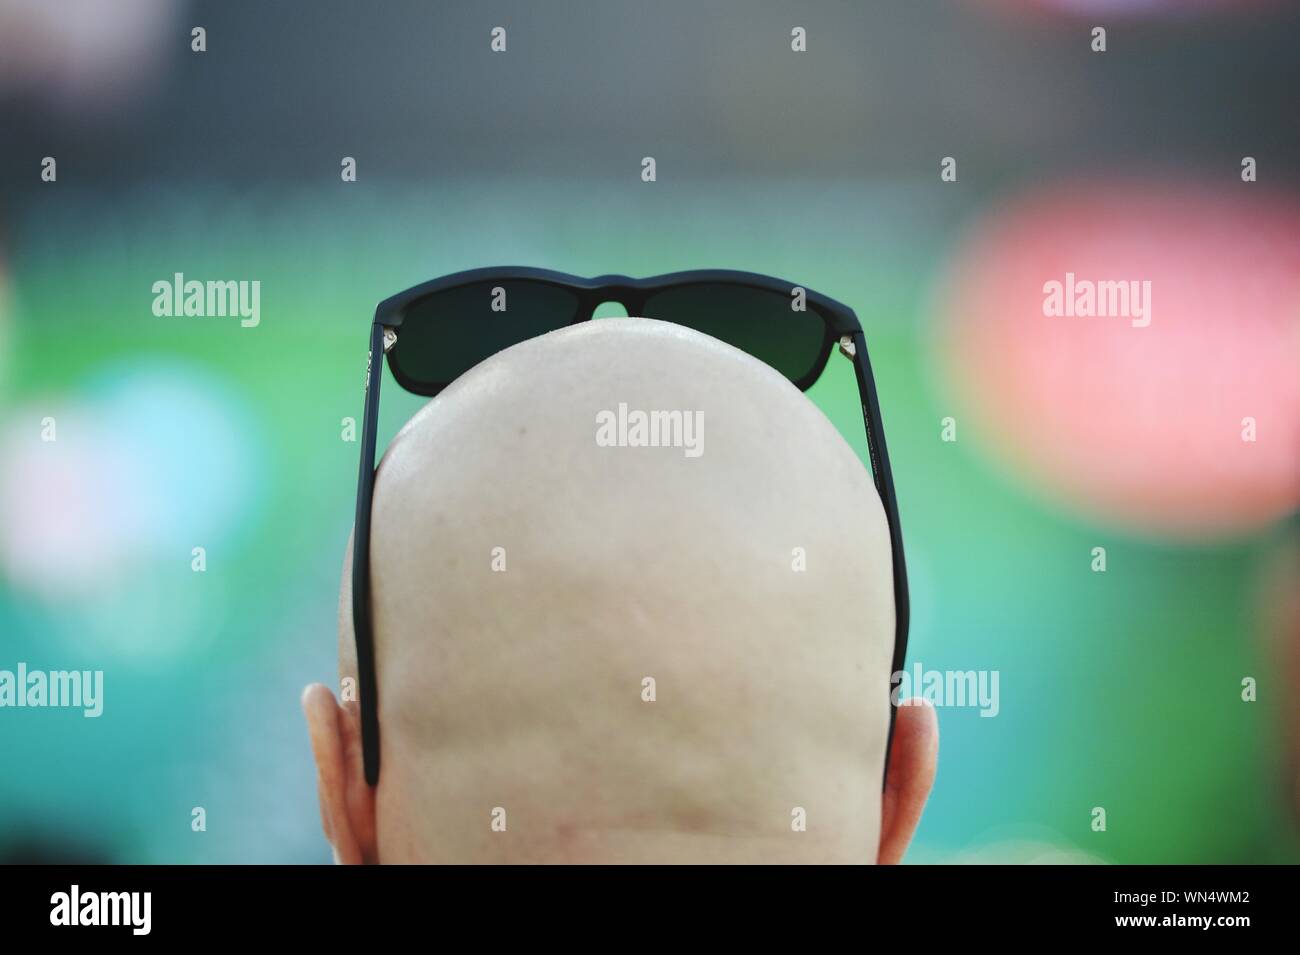 Rear View Of Man With Shaved Head Wearing Sunglasses Stock Photo